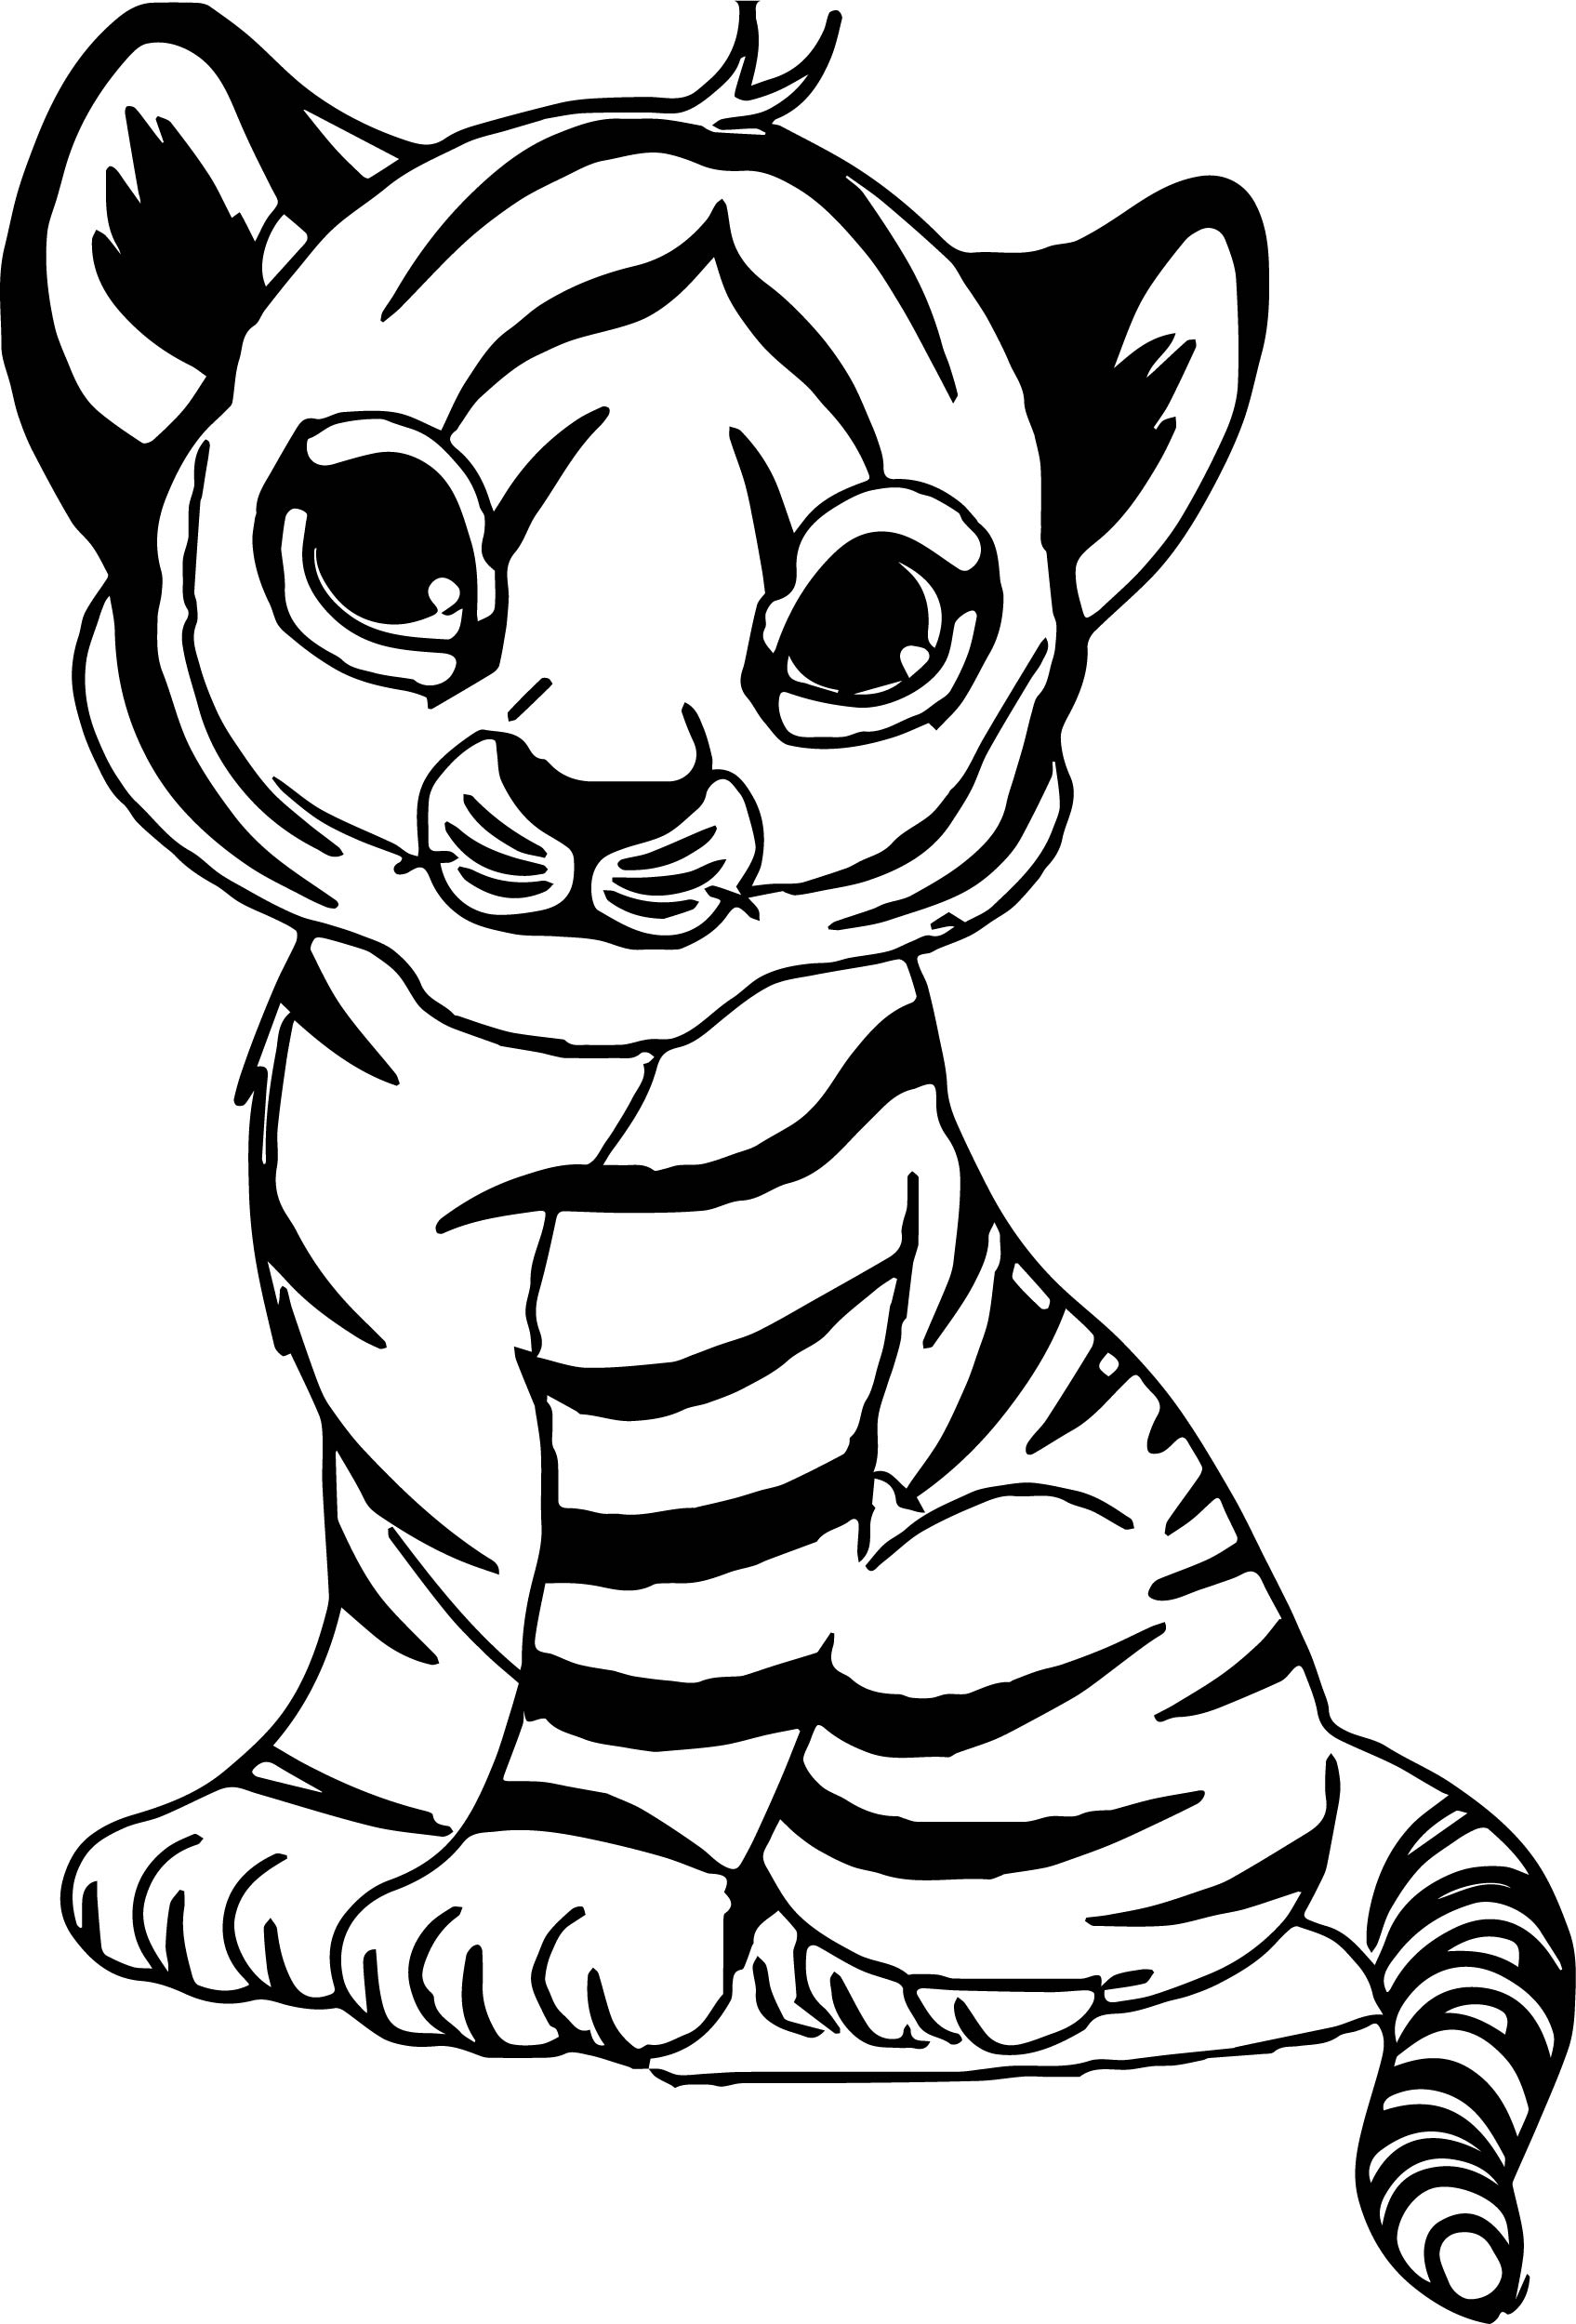 886 Animal Free Tiger Coloring Pages for Adult